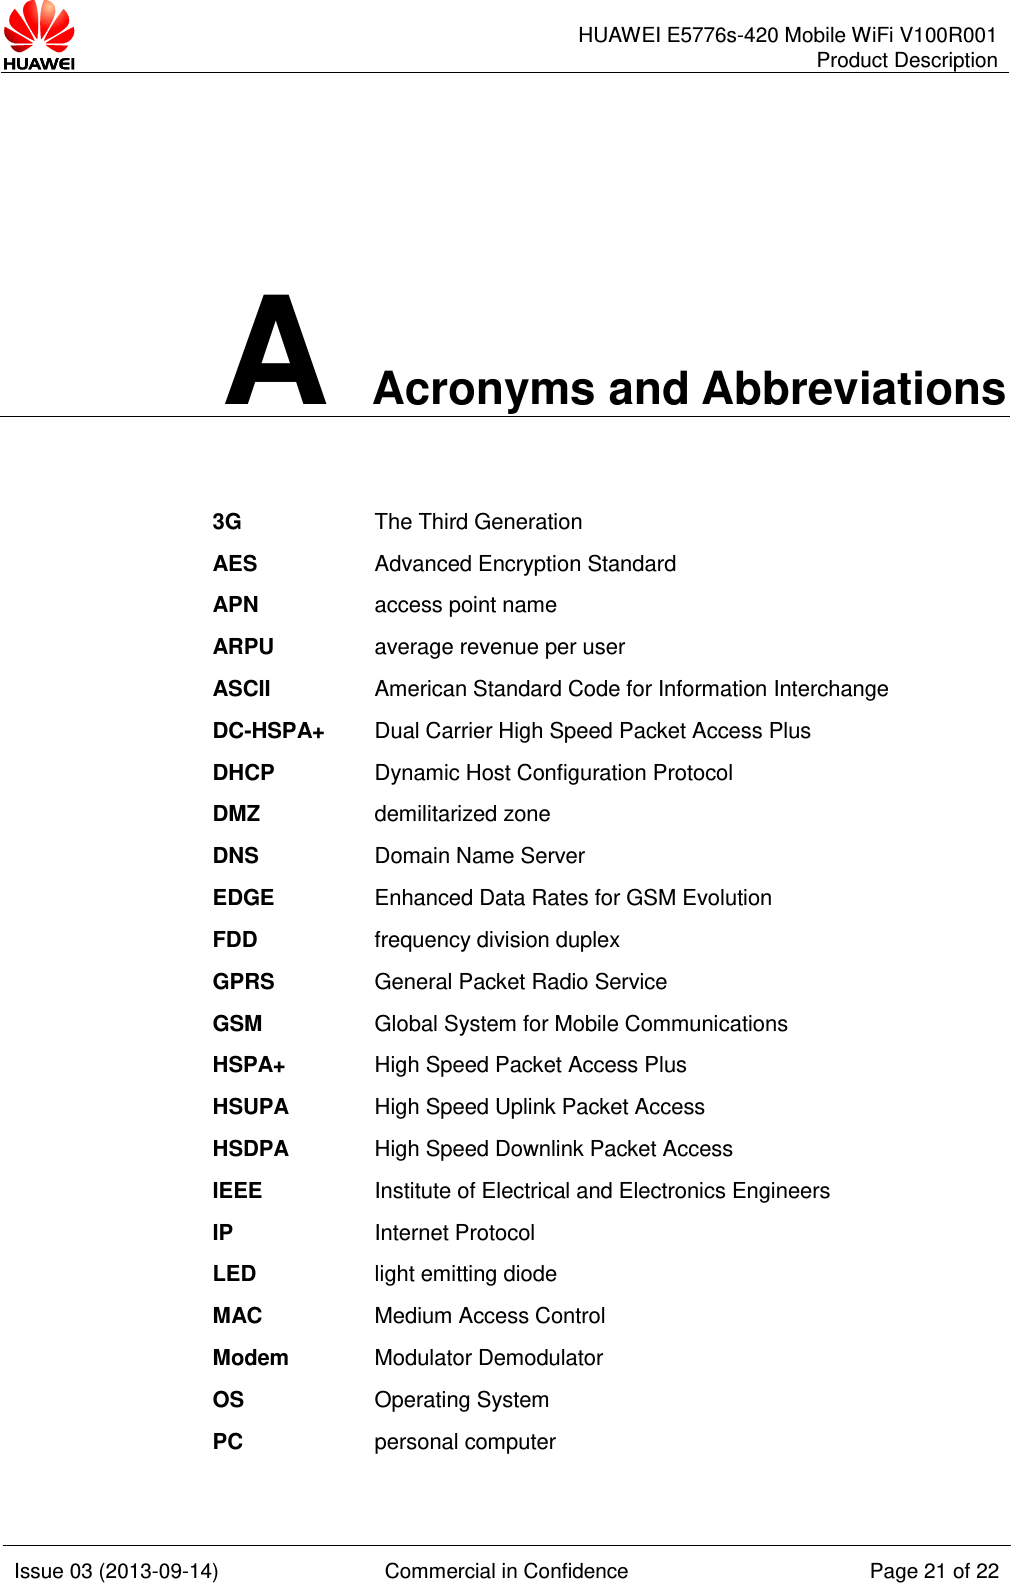      HUAWEI E5776s-420 Mobile WiFi V100R001 Product Description    Issue 03 (2013-09-14) Commercial in Confidence Page 21 of 22  A Acronyms and Abbreviations 3G The Third Generation AES Advanced Encryption Standard APN access point name ARPU average revenue per user ASCII American Standard Code for Information Interchange DC-HSPA+ Dual Carrier High Speed Packet Access Plus DHCP Dynamic Host Configuration Protocol DMZ demilitarized zone DNS Domain Name Server EDGE Enhanced Data Rates for GSM Evolution FDD frequency division duplex GPRS General Packet Radio Service GSM Global System for Mobile Communications HSPA+ High Speed Packet Access Plus HSUPA High Speed Uplink Packet Access HSDPA High Speed Downlink Packet Access IEEE Institute of Electrical and Electronics Engineers IP Internet Protocol LED light emitting diode MAC Medium Access Control Modem Modulator Demodulator OS Operating System PC personal computer 